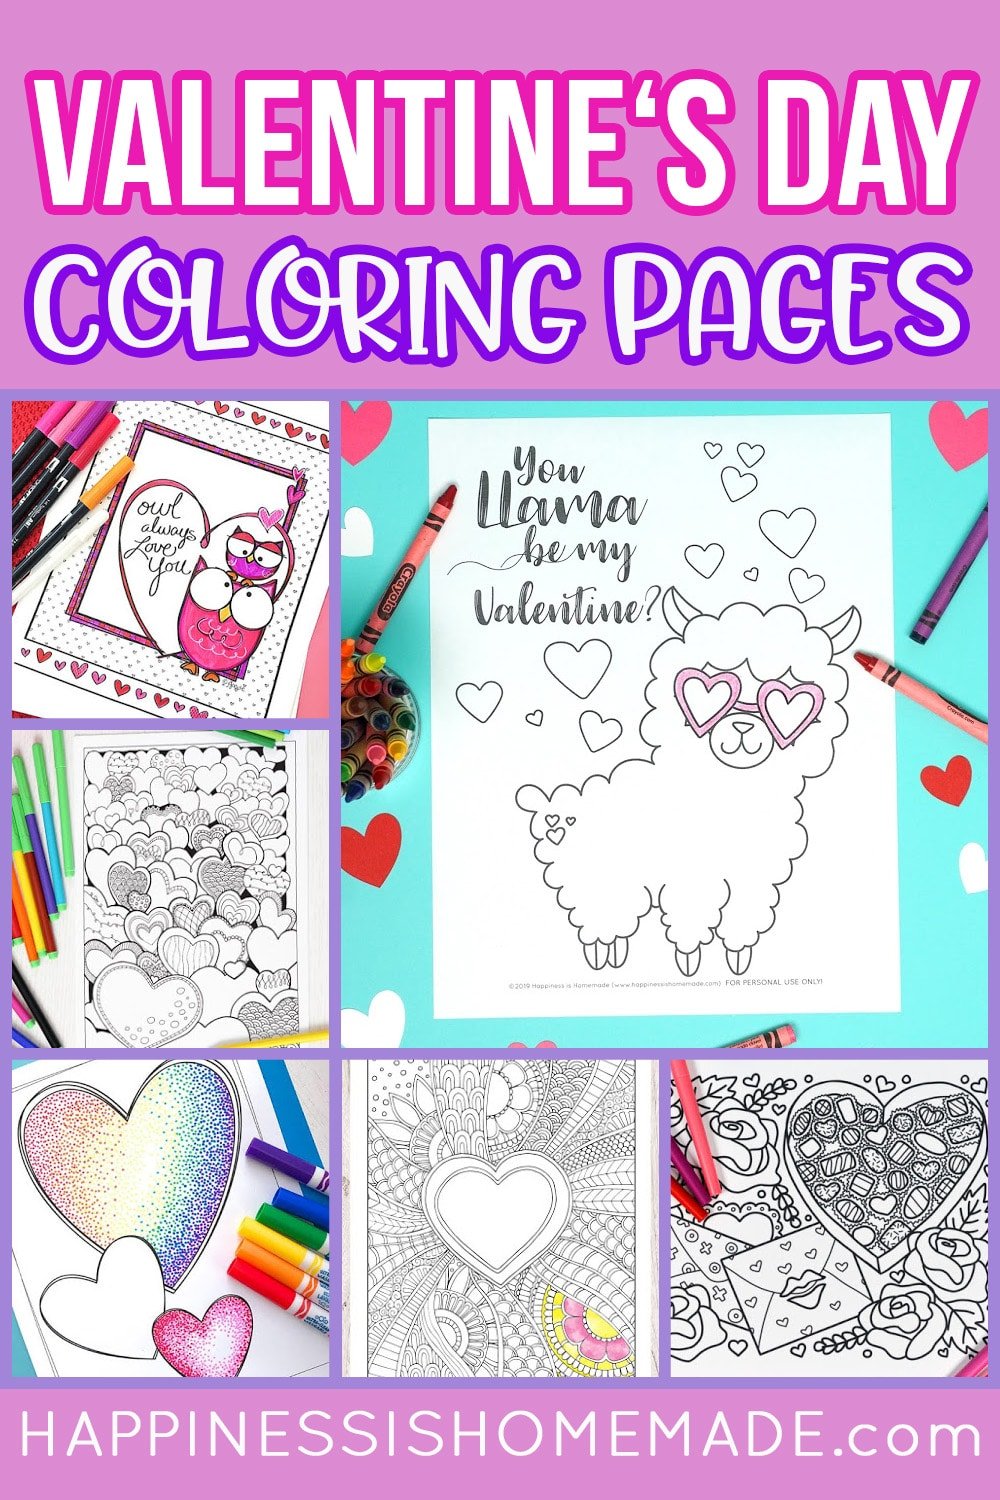 20+ Valentines Coloring Pages   Happiness is Homemade